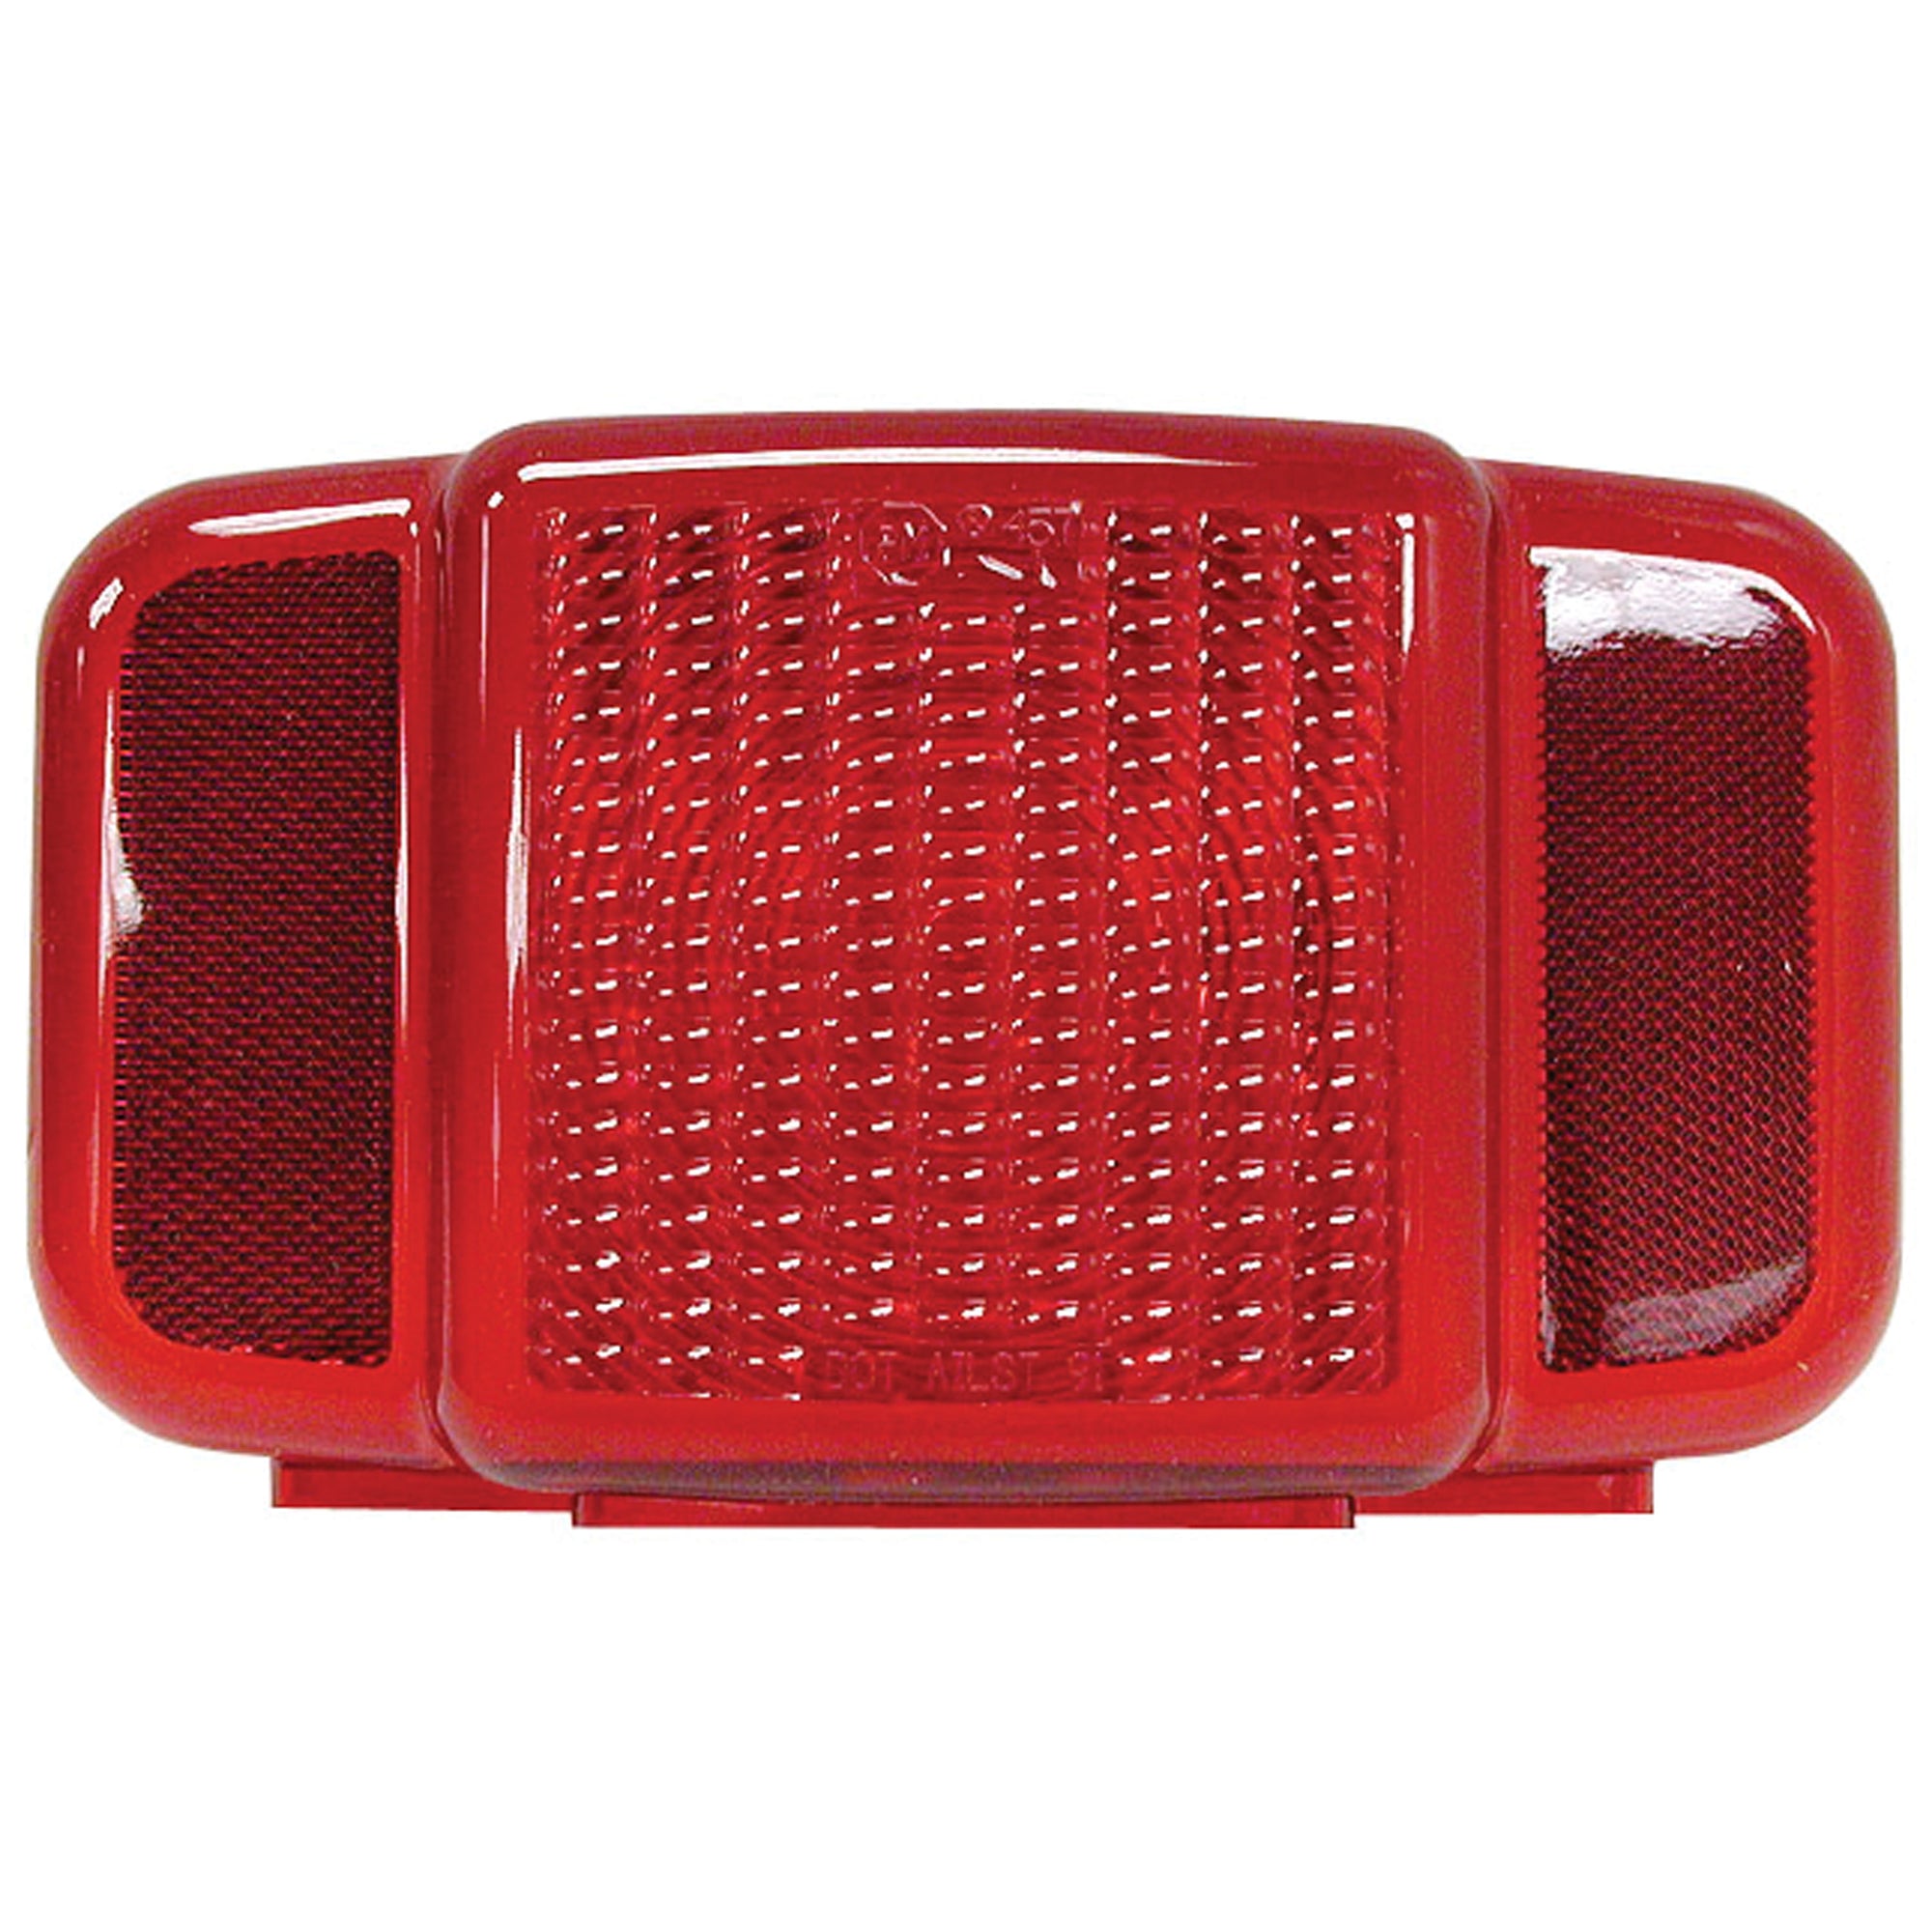 Anderson Marine B457L-15 457 Combination Tail Light - Replacement Lens